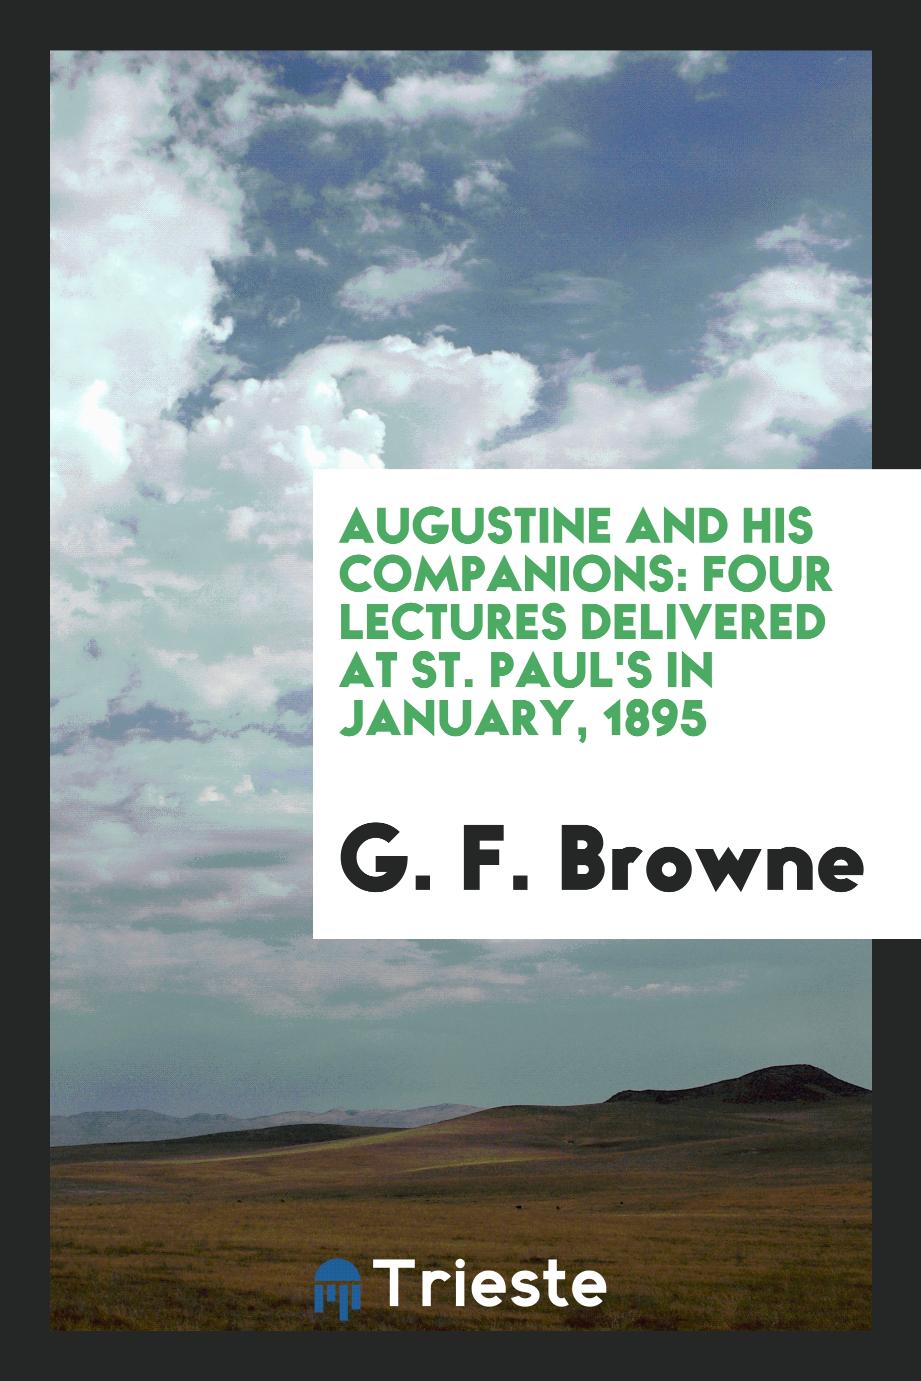 Augustine and his companions: four lectures delivered at St. Paul's in January, 1895